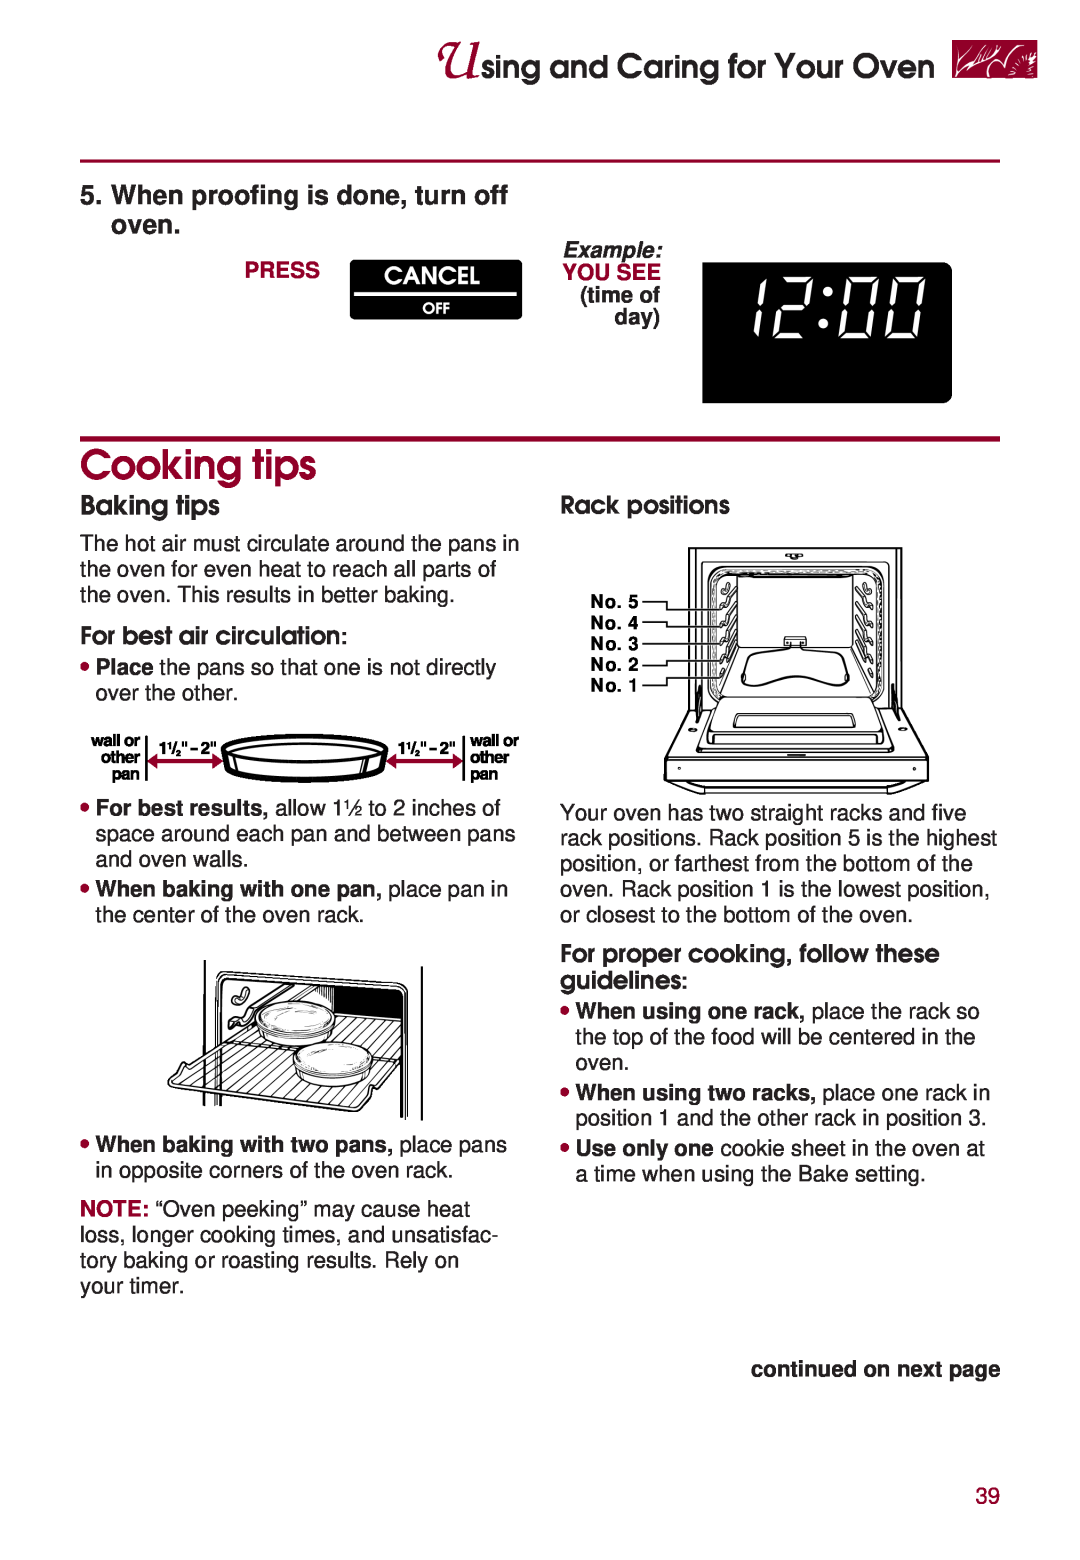 KitchenAid KERS507 warranty Cooking tips, When proofing is done, turn off oven, Baking tips, Using and Caring for Your Oven 